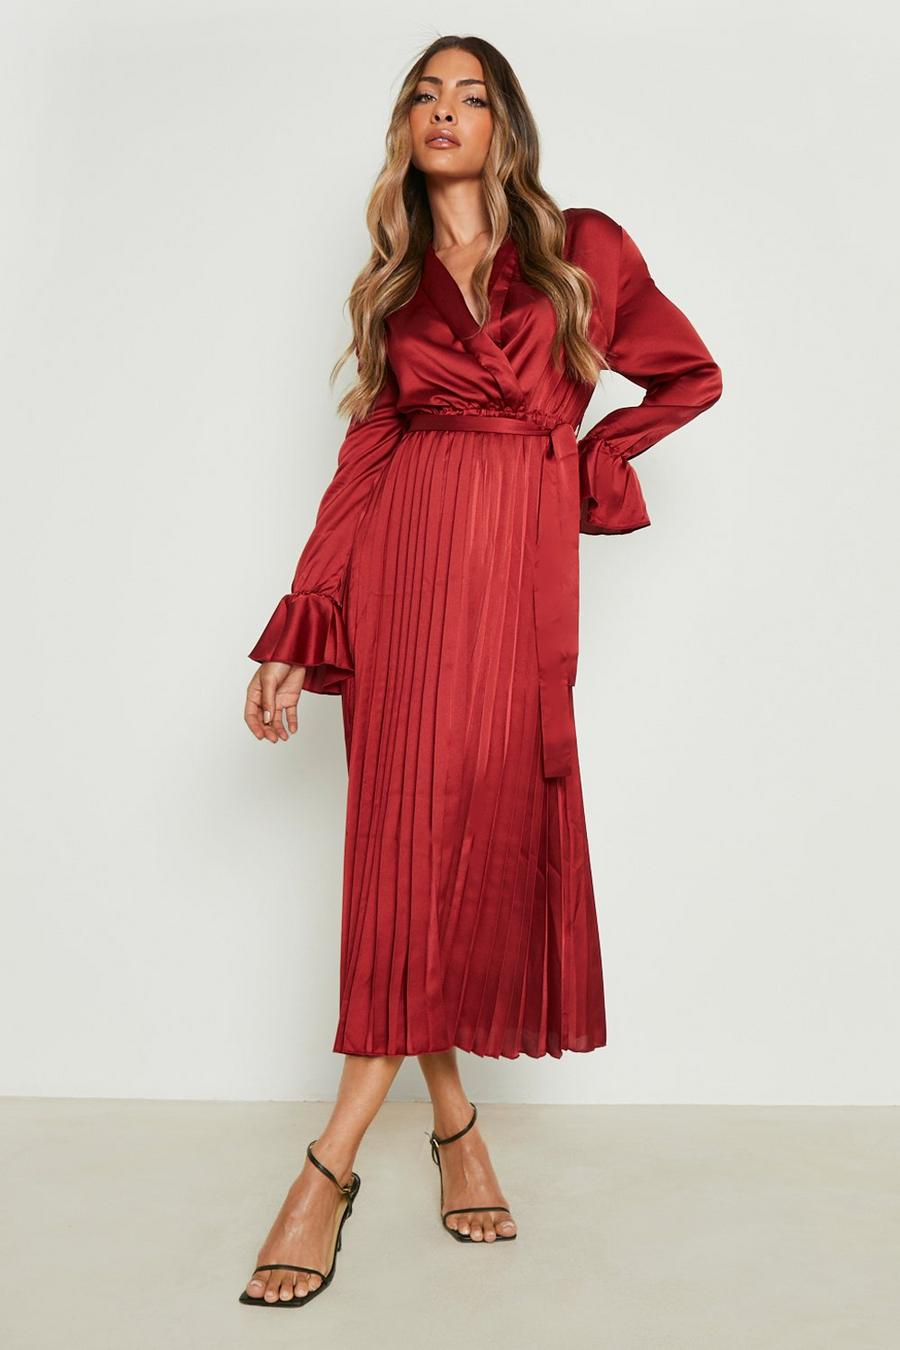 Berry red Satin Pleated Midaxi Dress